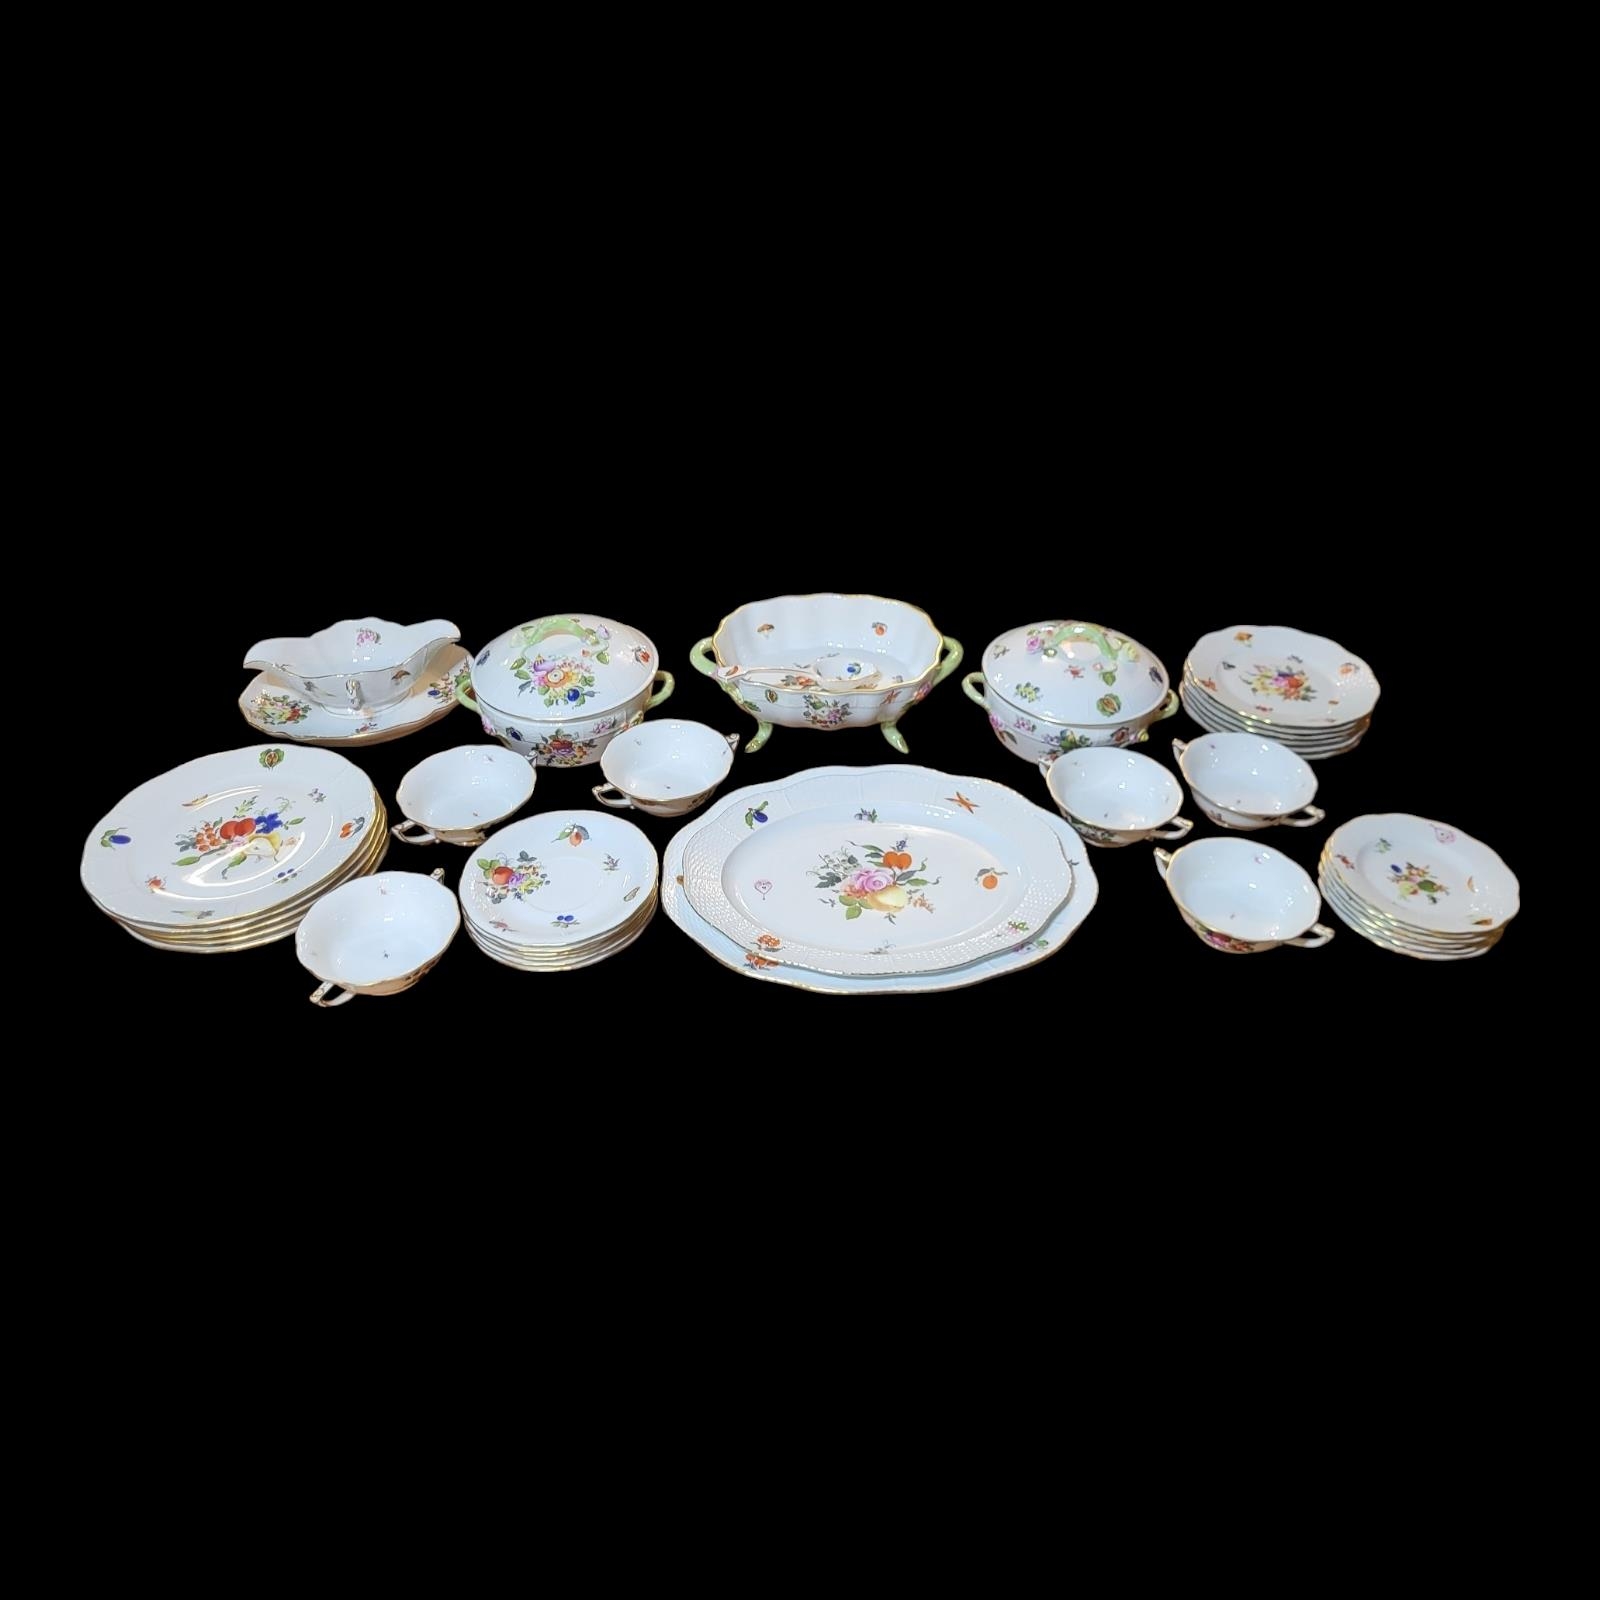 HEREND, A 20TH CENTURY HARD PORCELAIN DINNER SERVICE, CIRCA 1930 Comprising thirty-six pieces in - Image 3 of 11